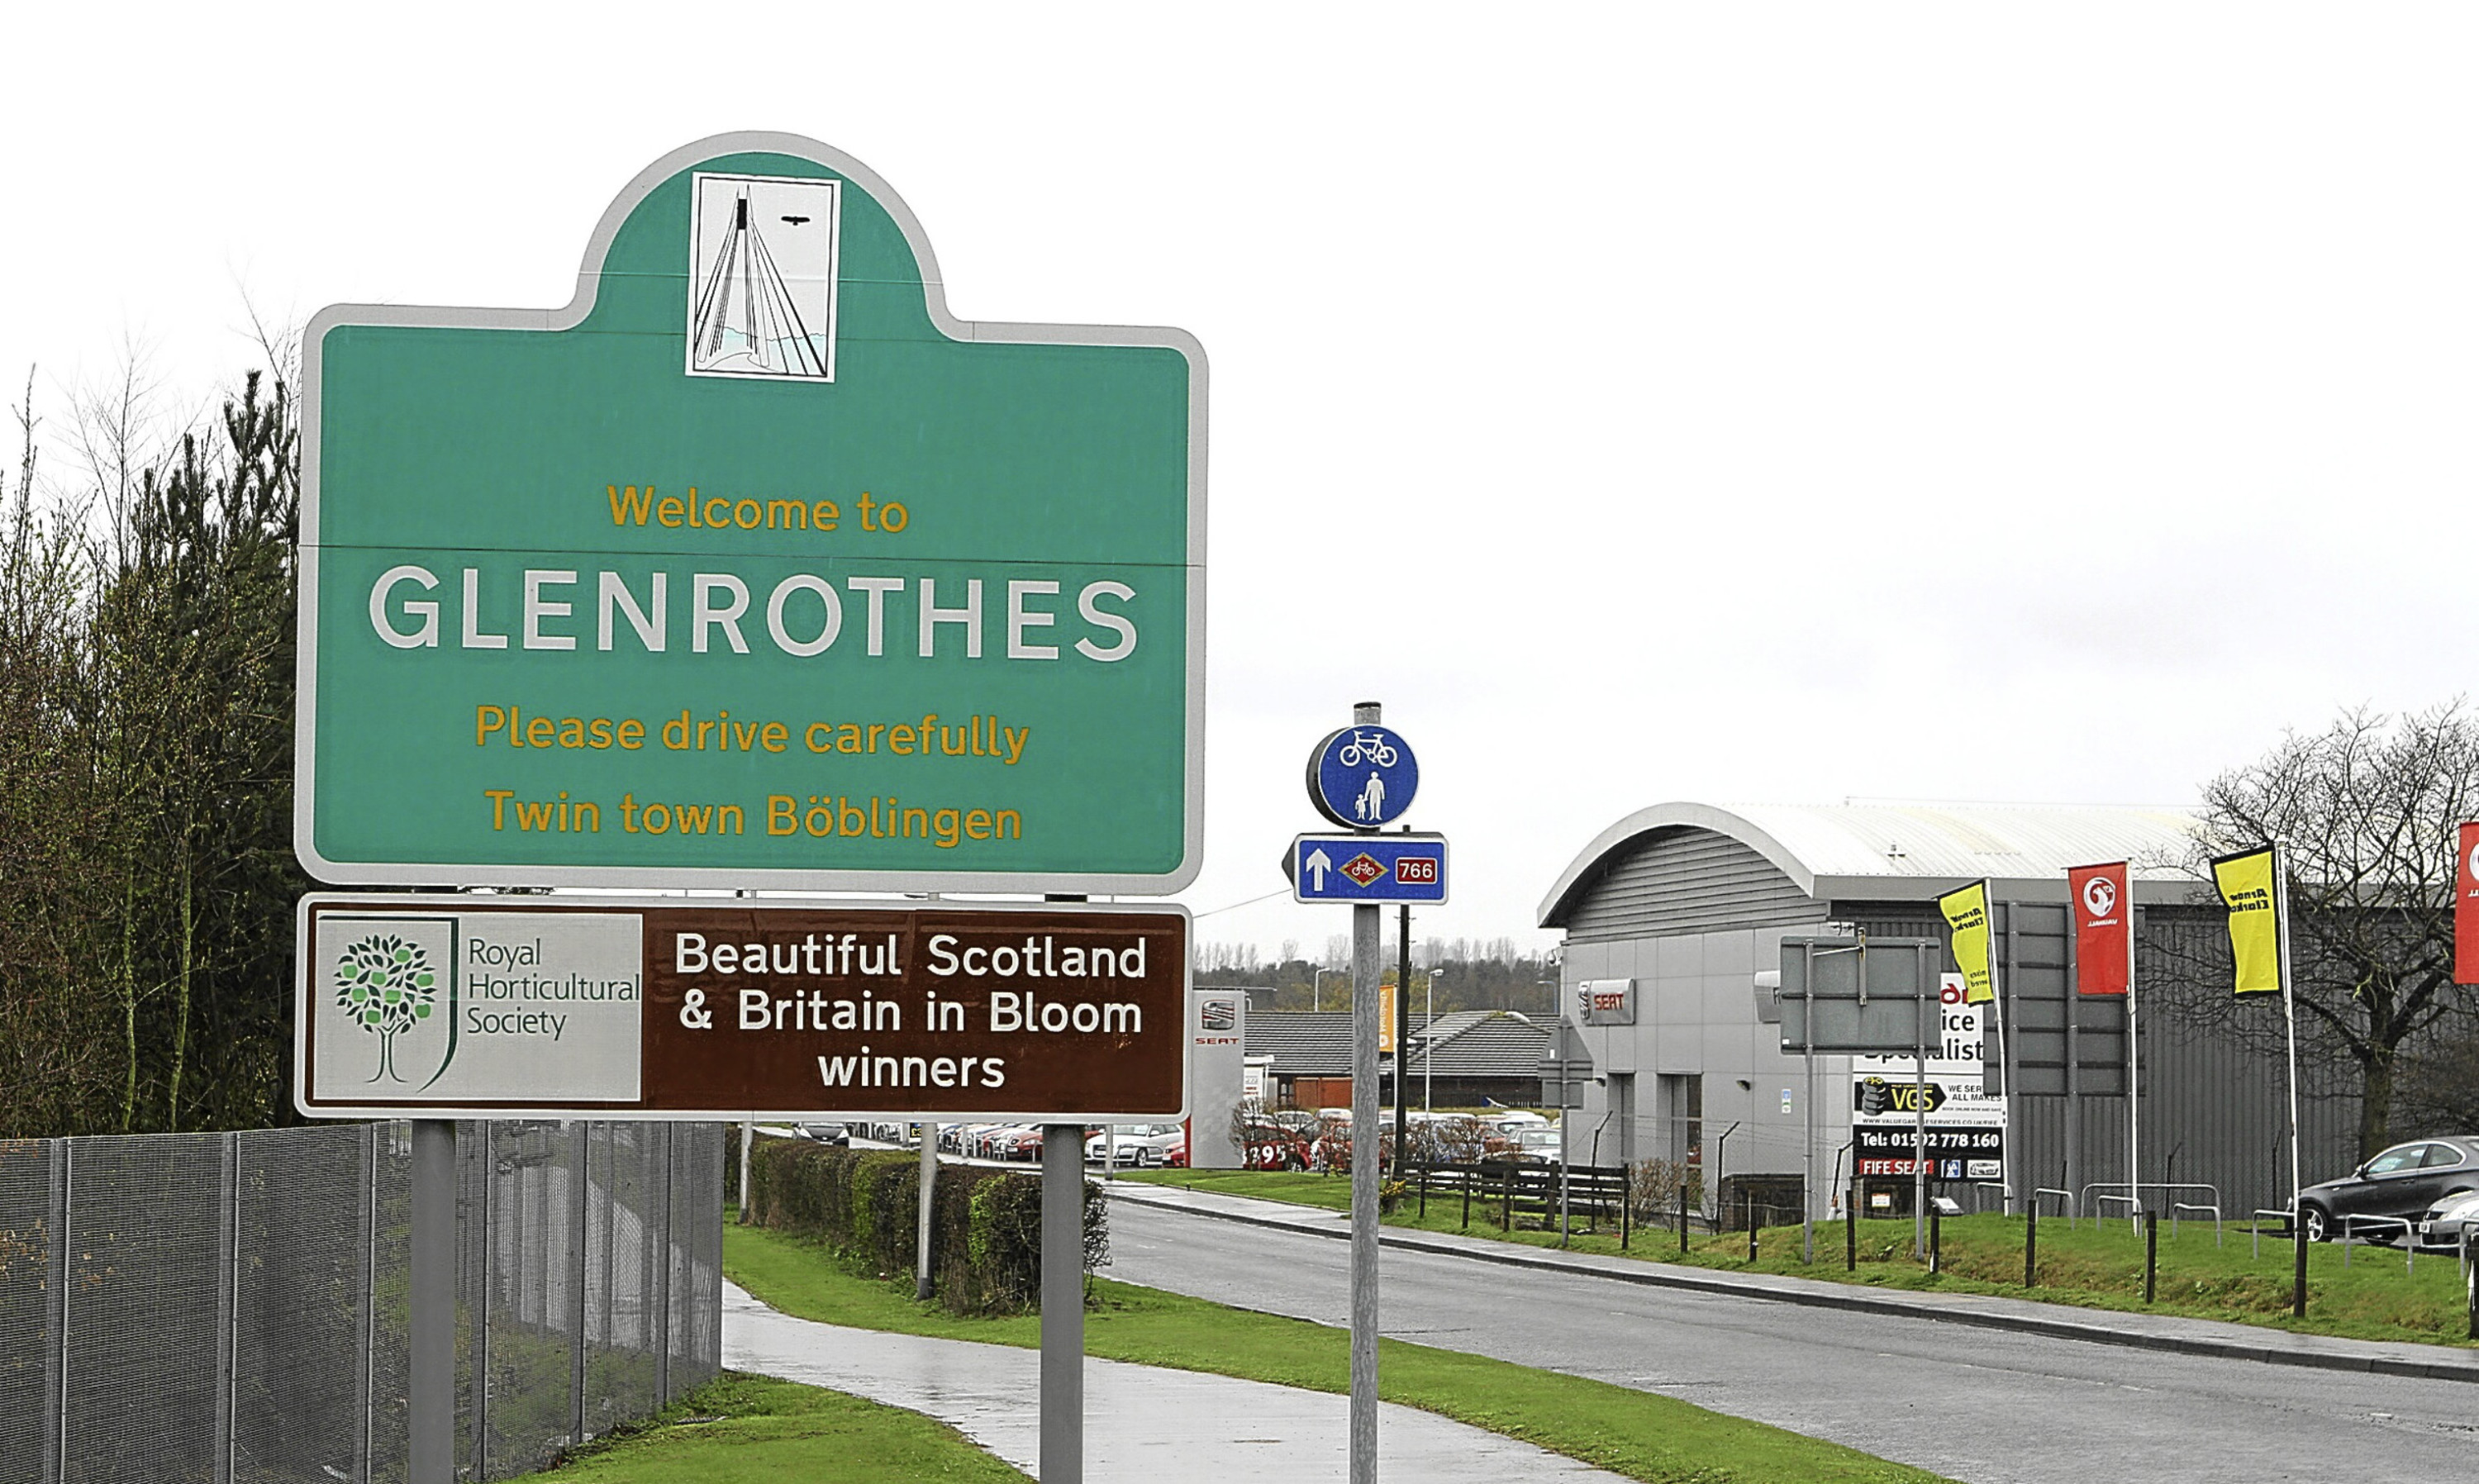 Affordable housing in Glenrothes is said to be on track.